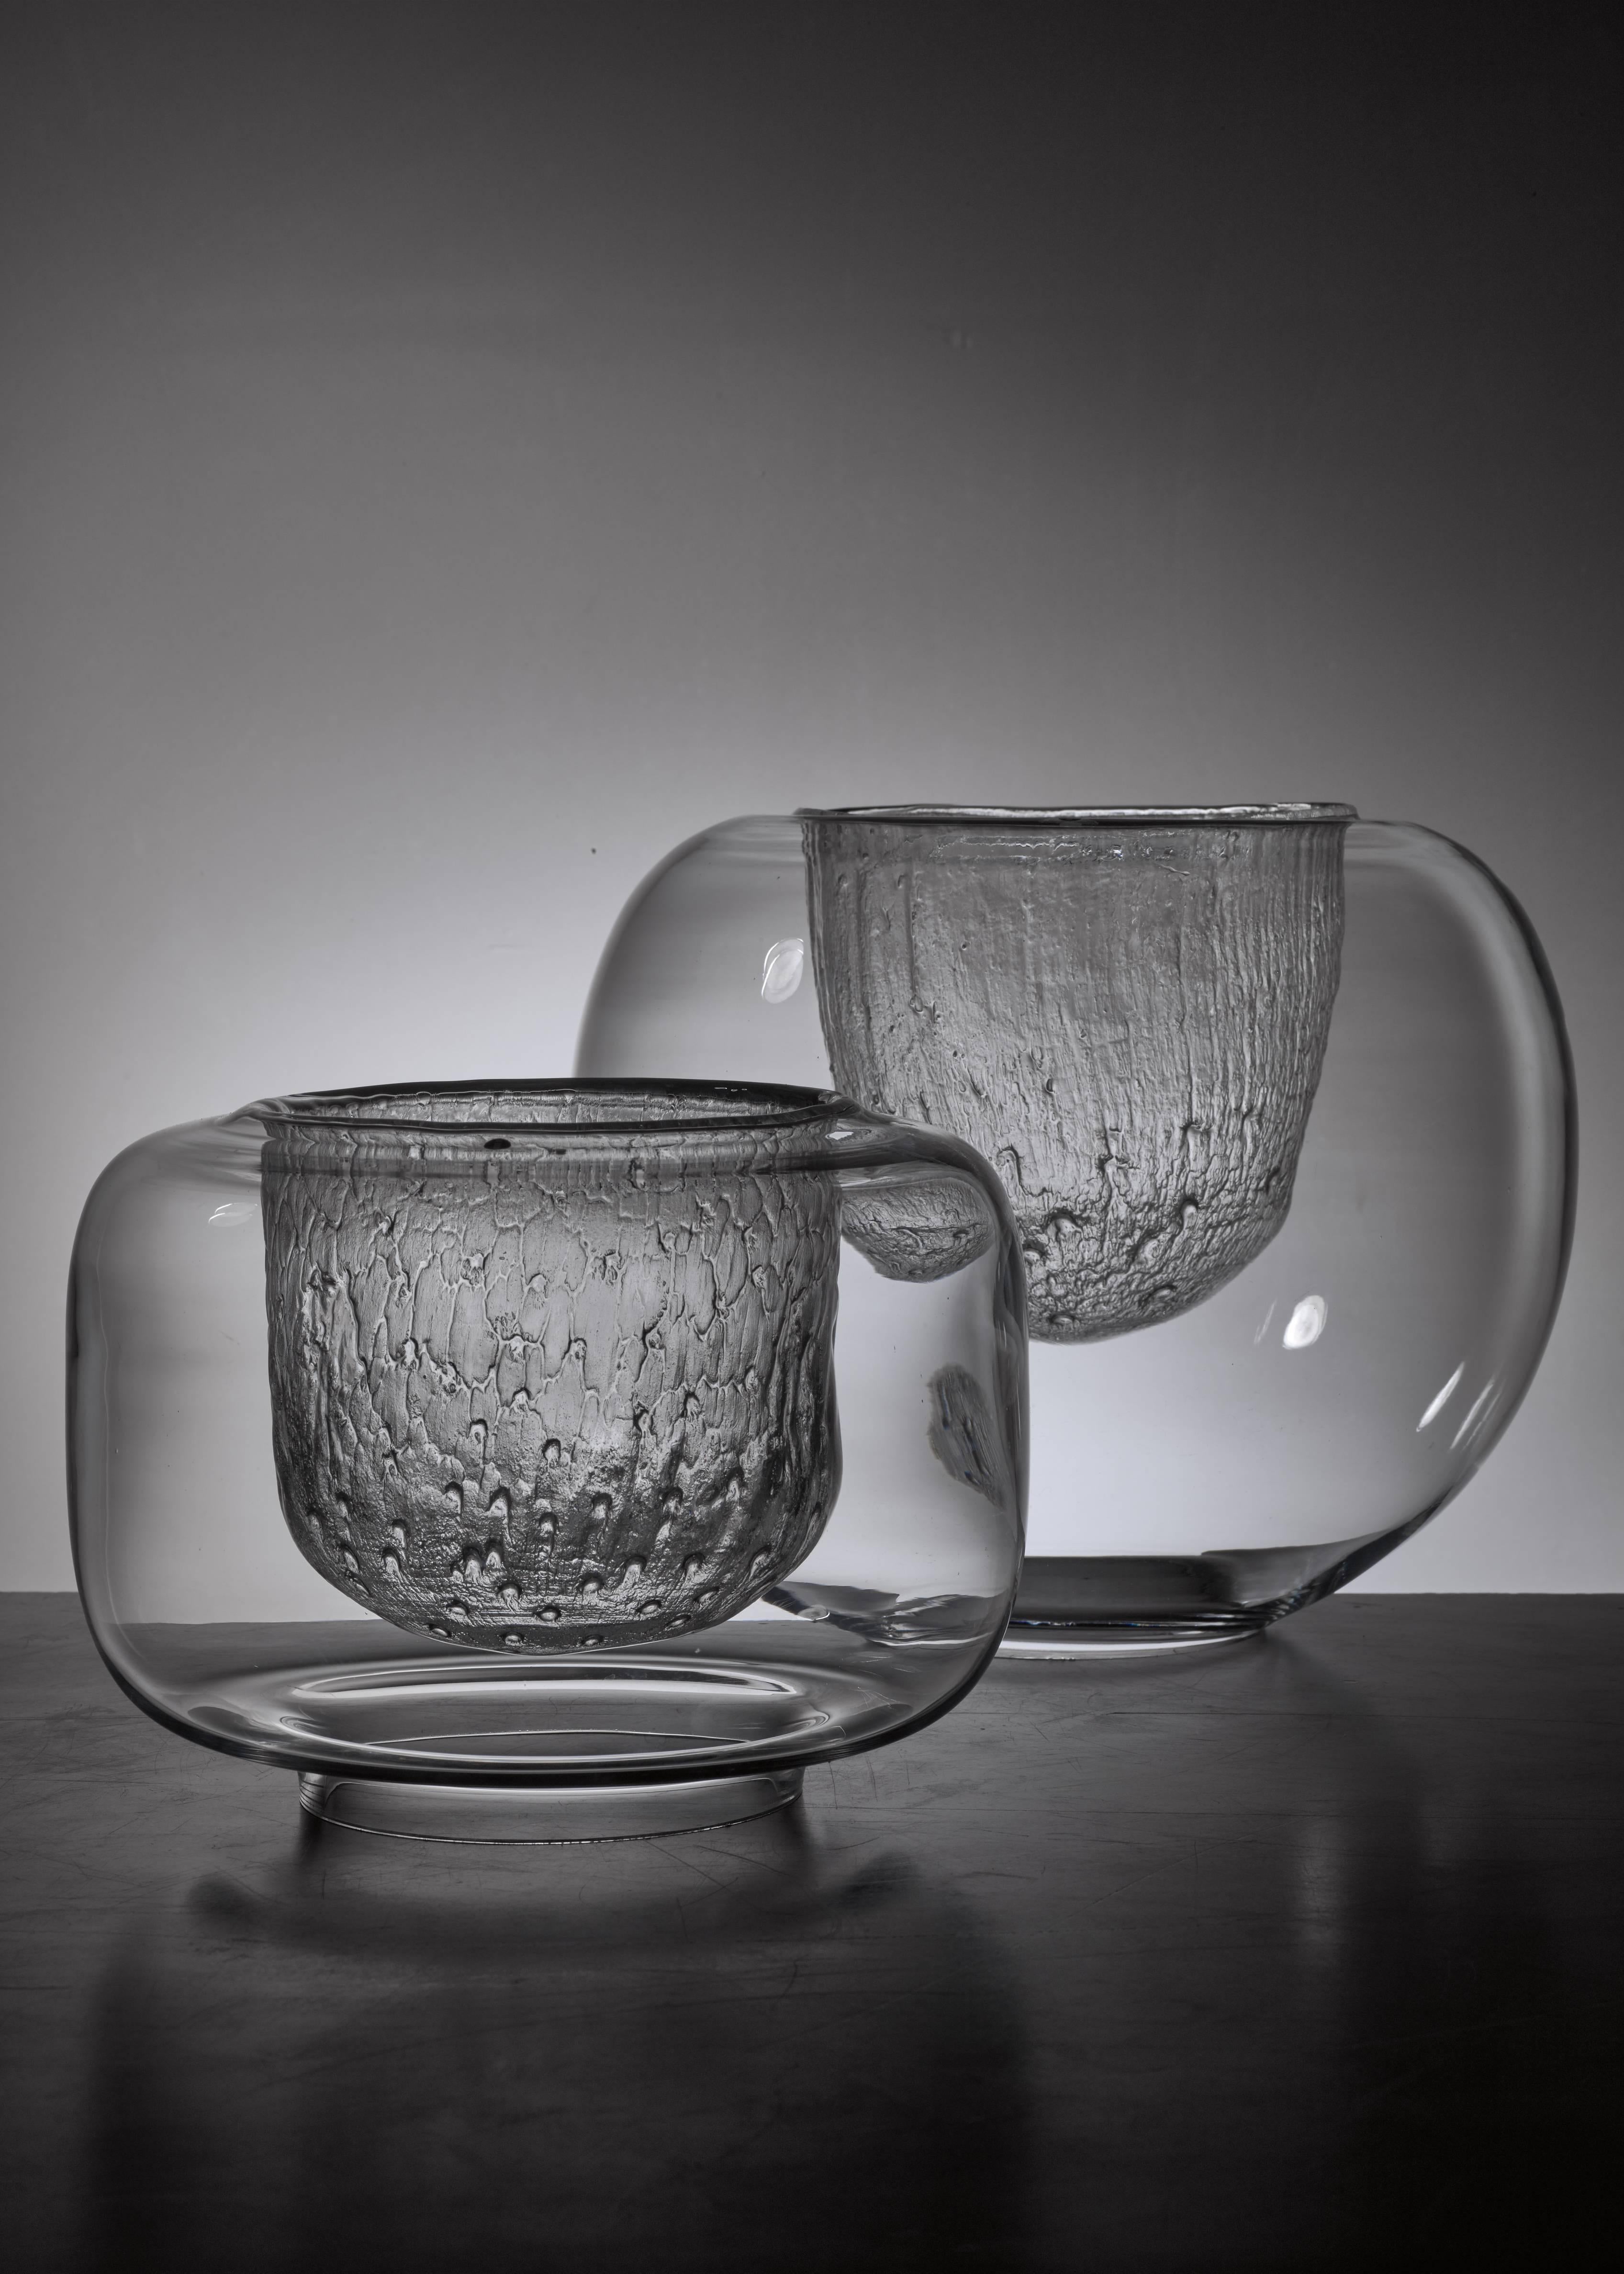 A pair of glass bowls by Timo Sarpaneva for Iittala, Finland. Smooth glass on the outside and ice glass on the inside. These pieces are original Finn Form stock from the 1960s and never used, with labels and in perfect condition. Marked by Sarpaneva